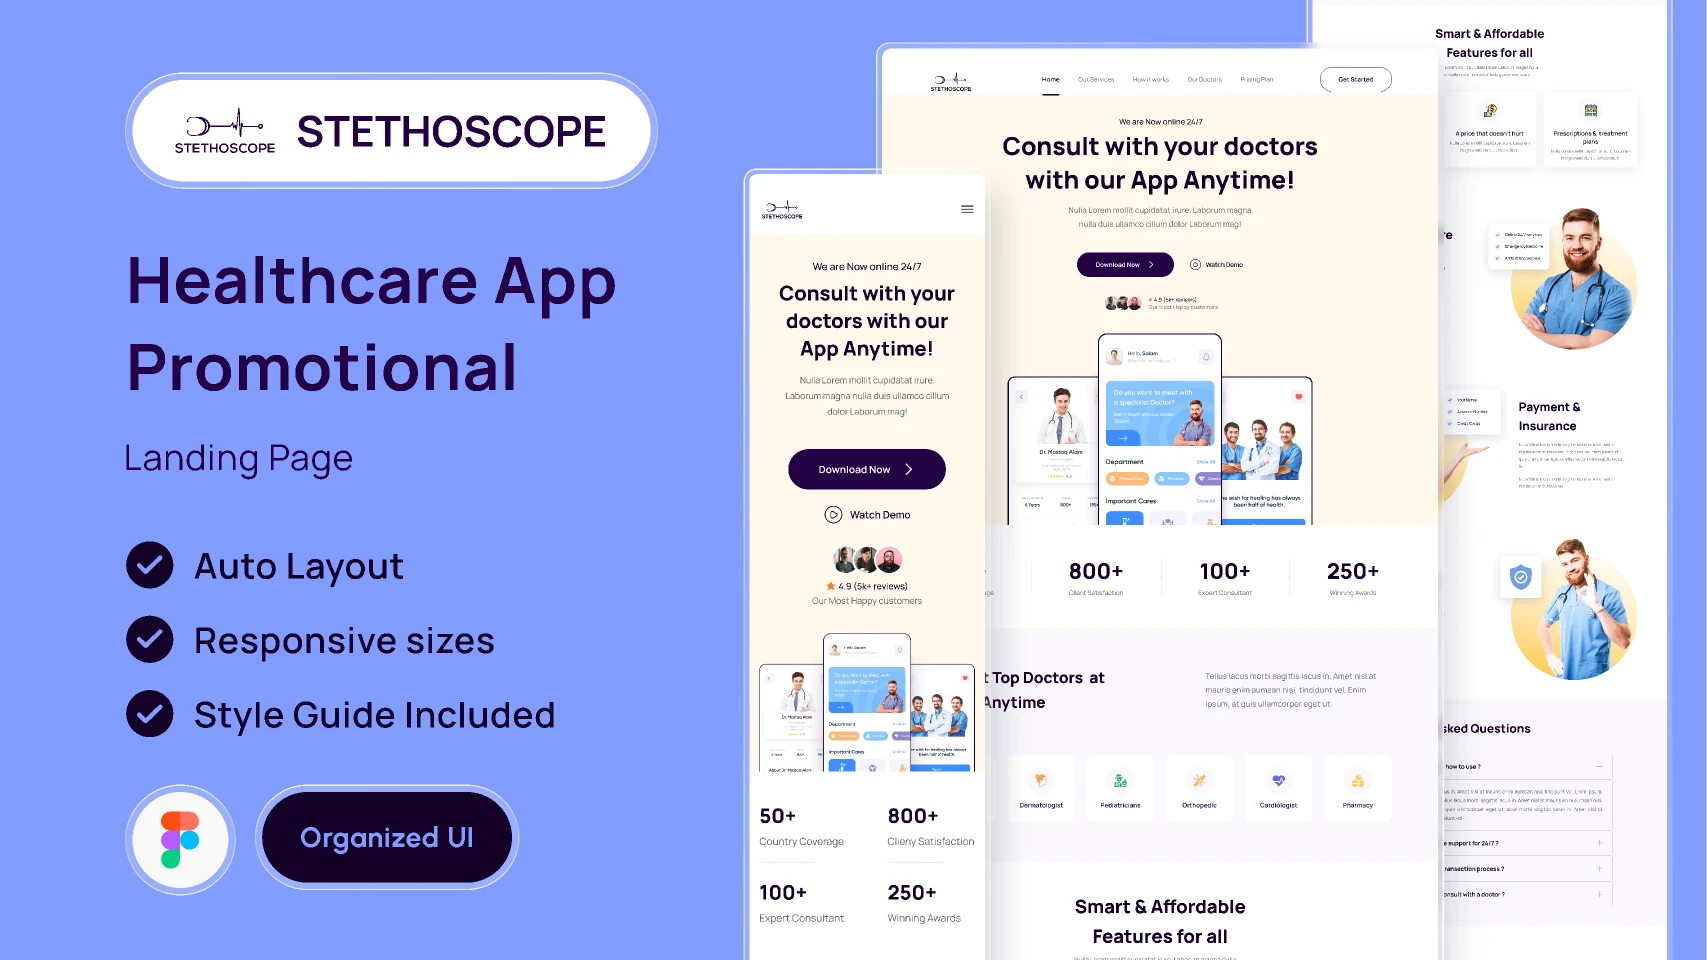 Stethoscope -Healthcare App Promotional Landing Page UI Design for Figma and Adobe XD